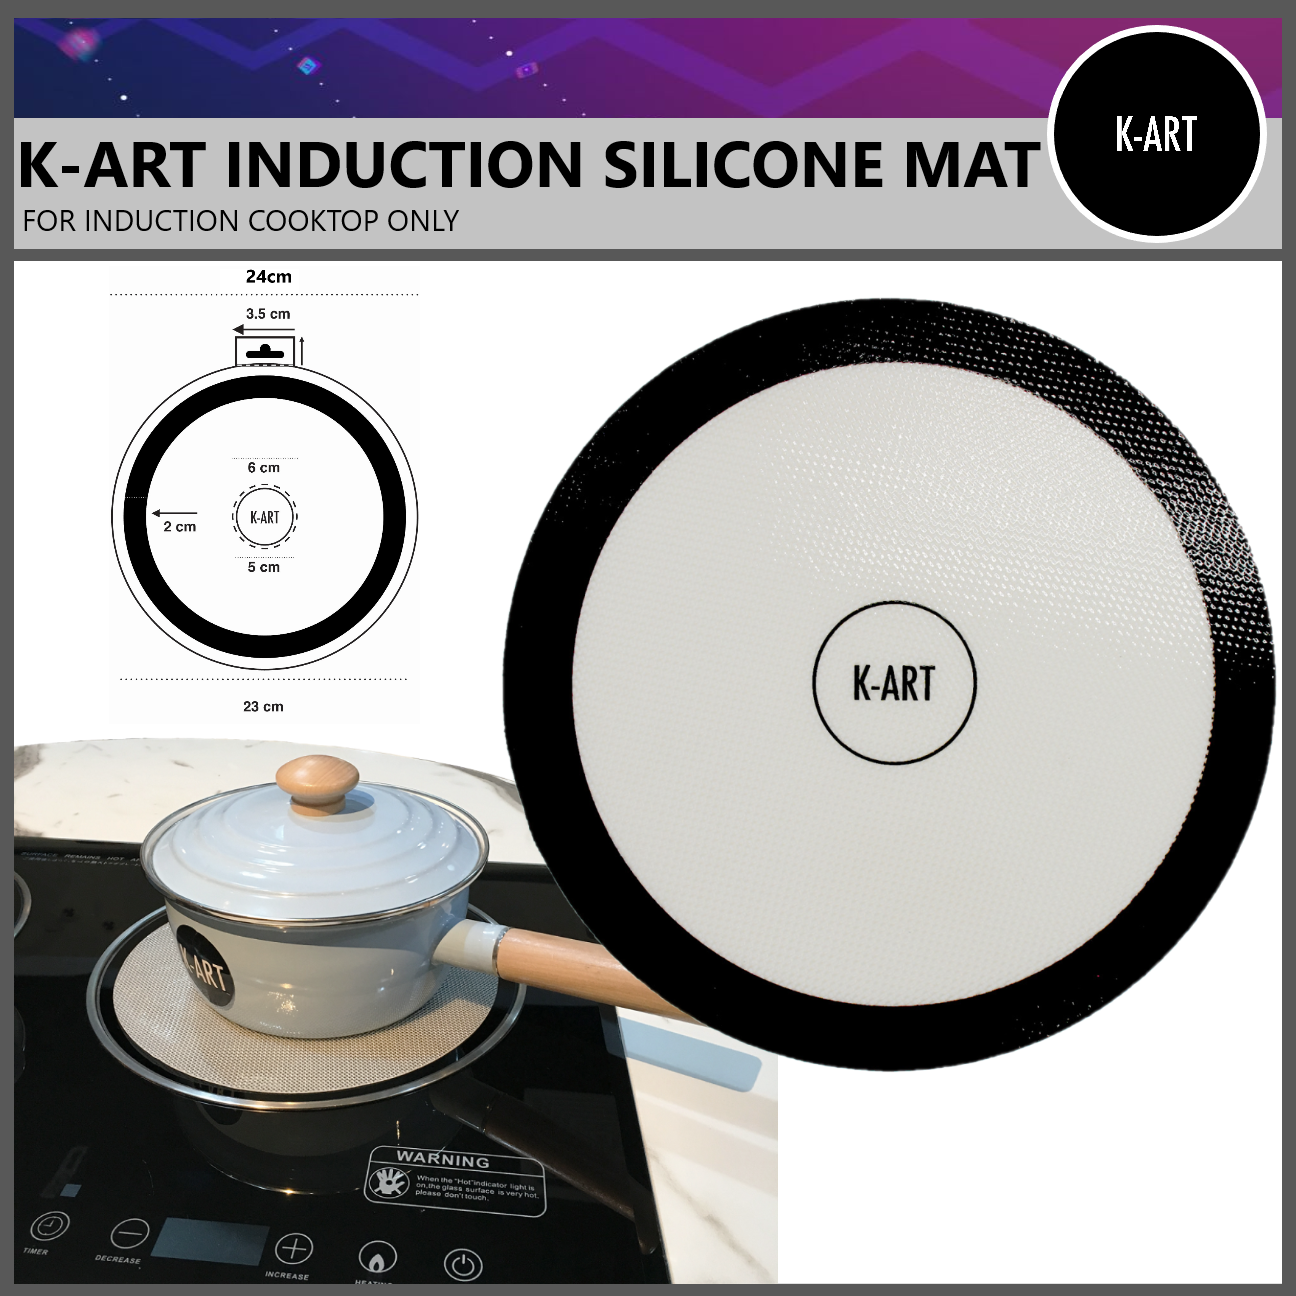 Few Stocks Left ] K-ART INDUCTION COOKTOP Protective Cover